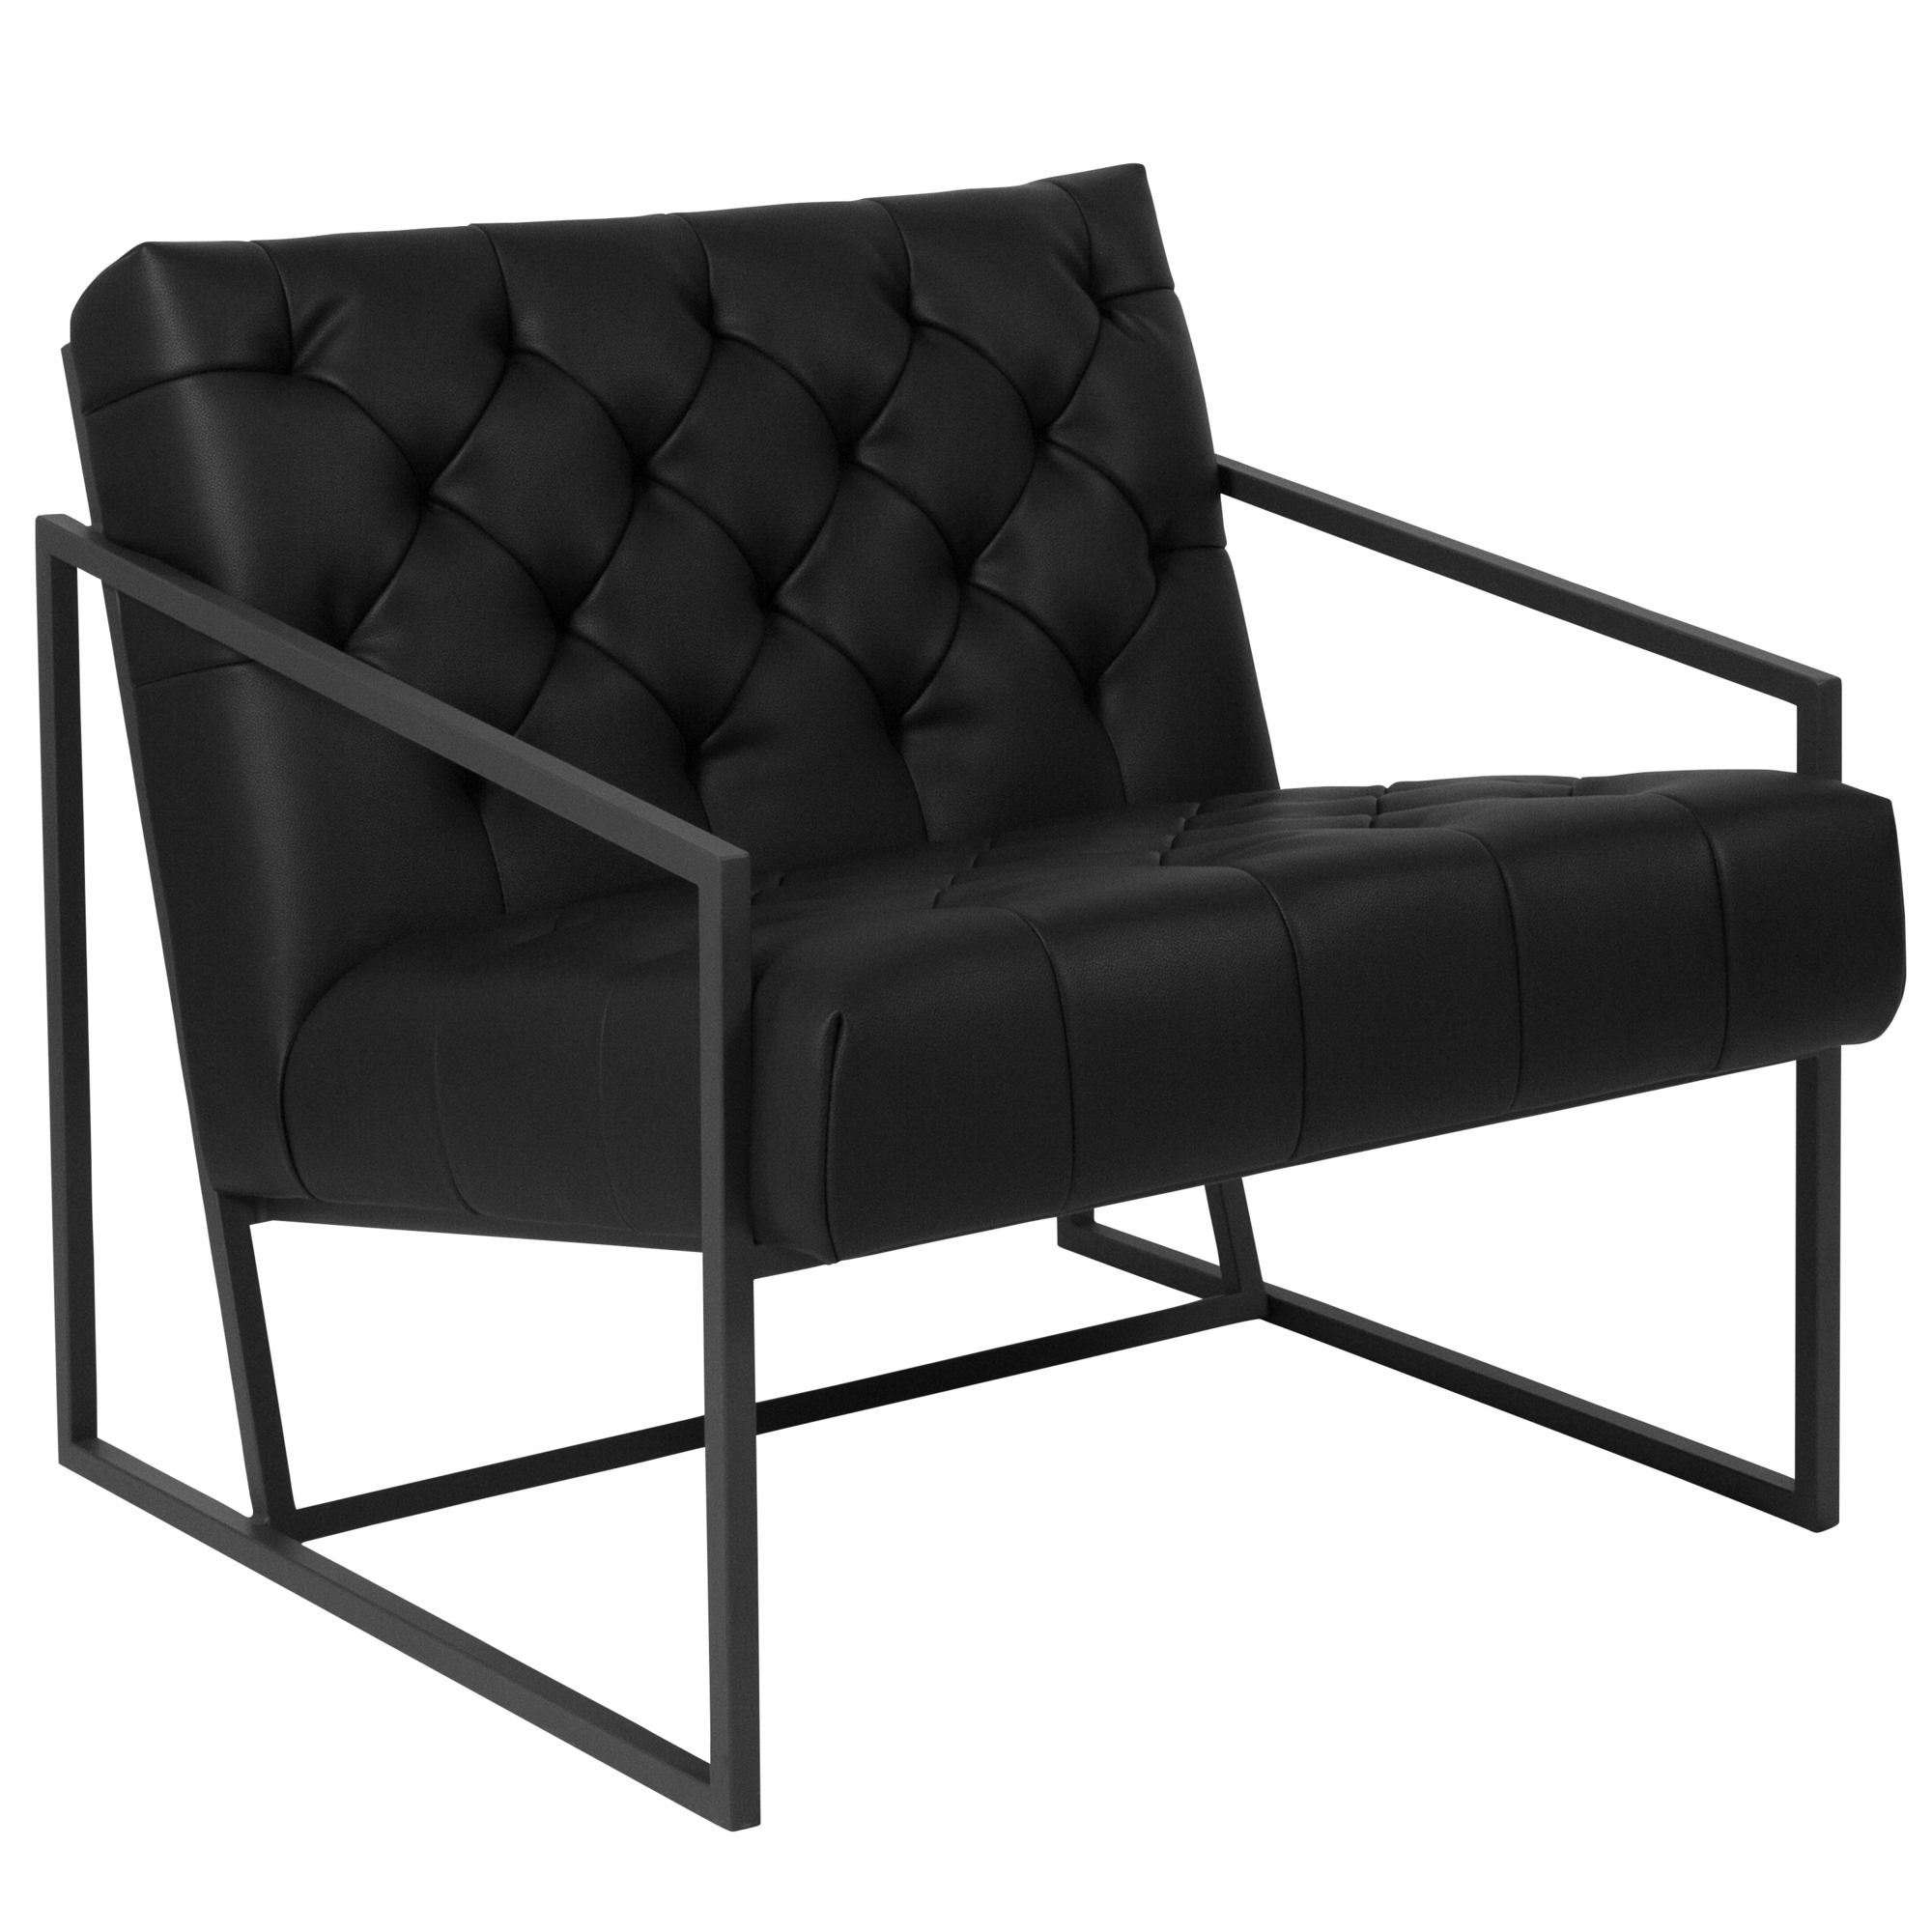 Flash Furniture, Black LeatherSoft Tufted Lounge Chair, Primary Color Black, Included (qty.) 1, Model ZB8522BK